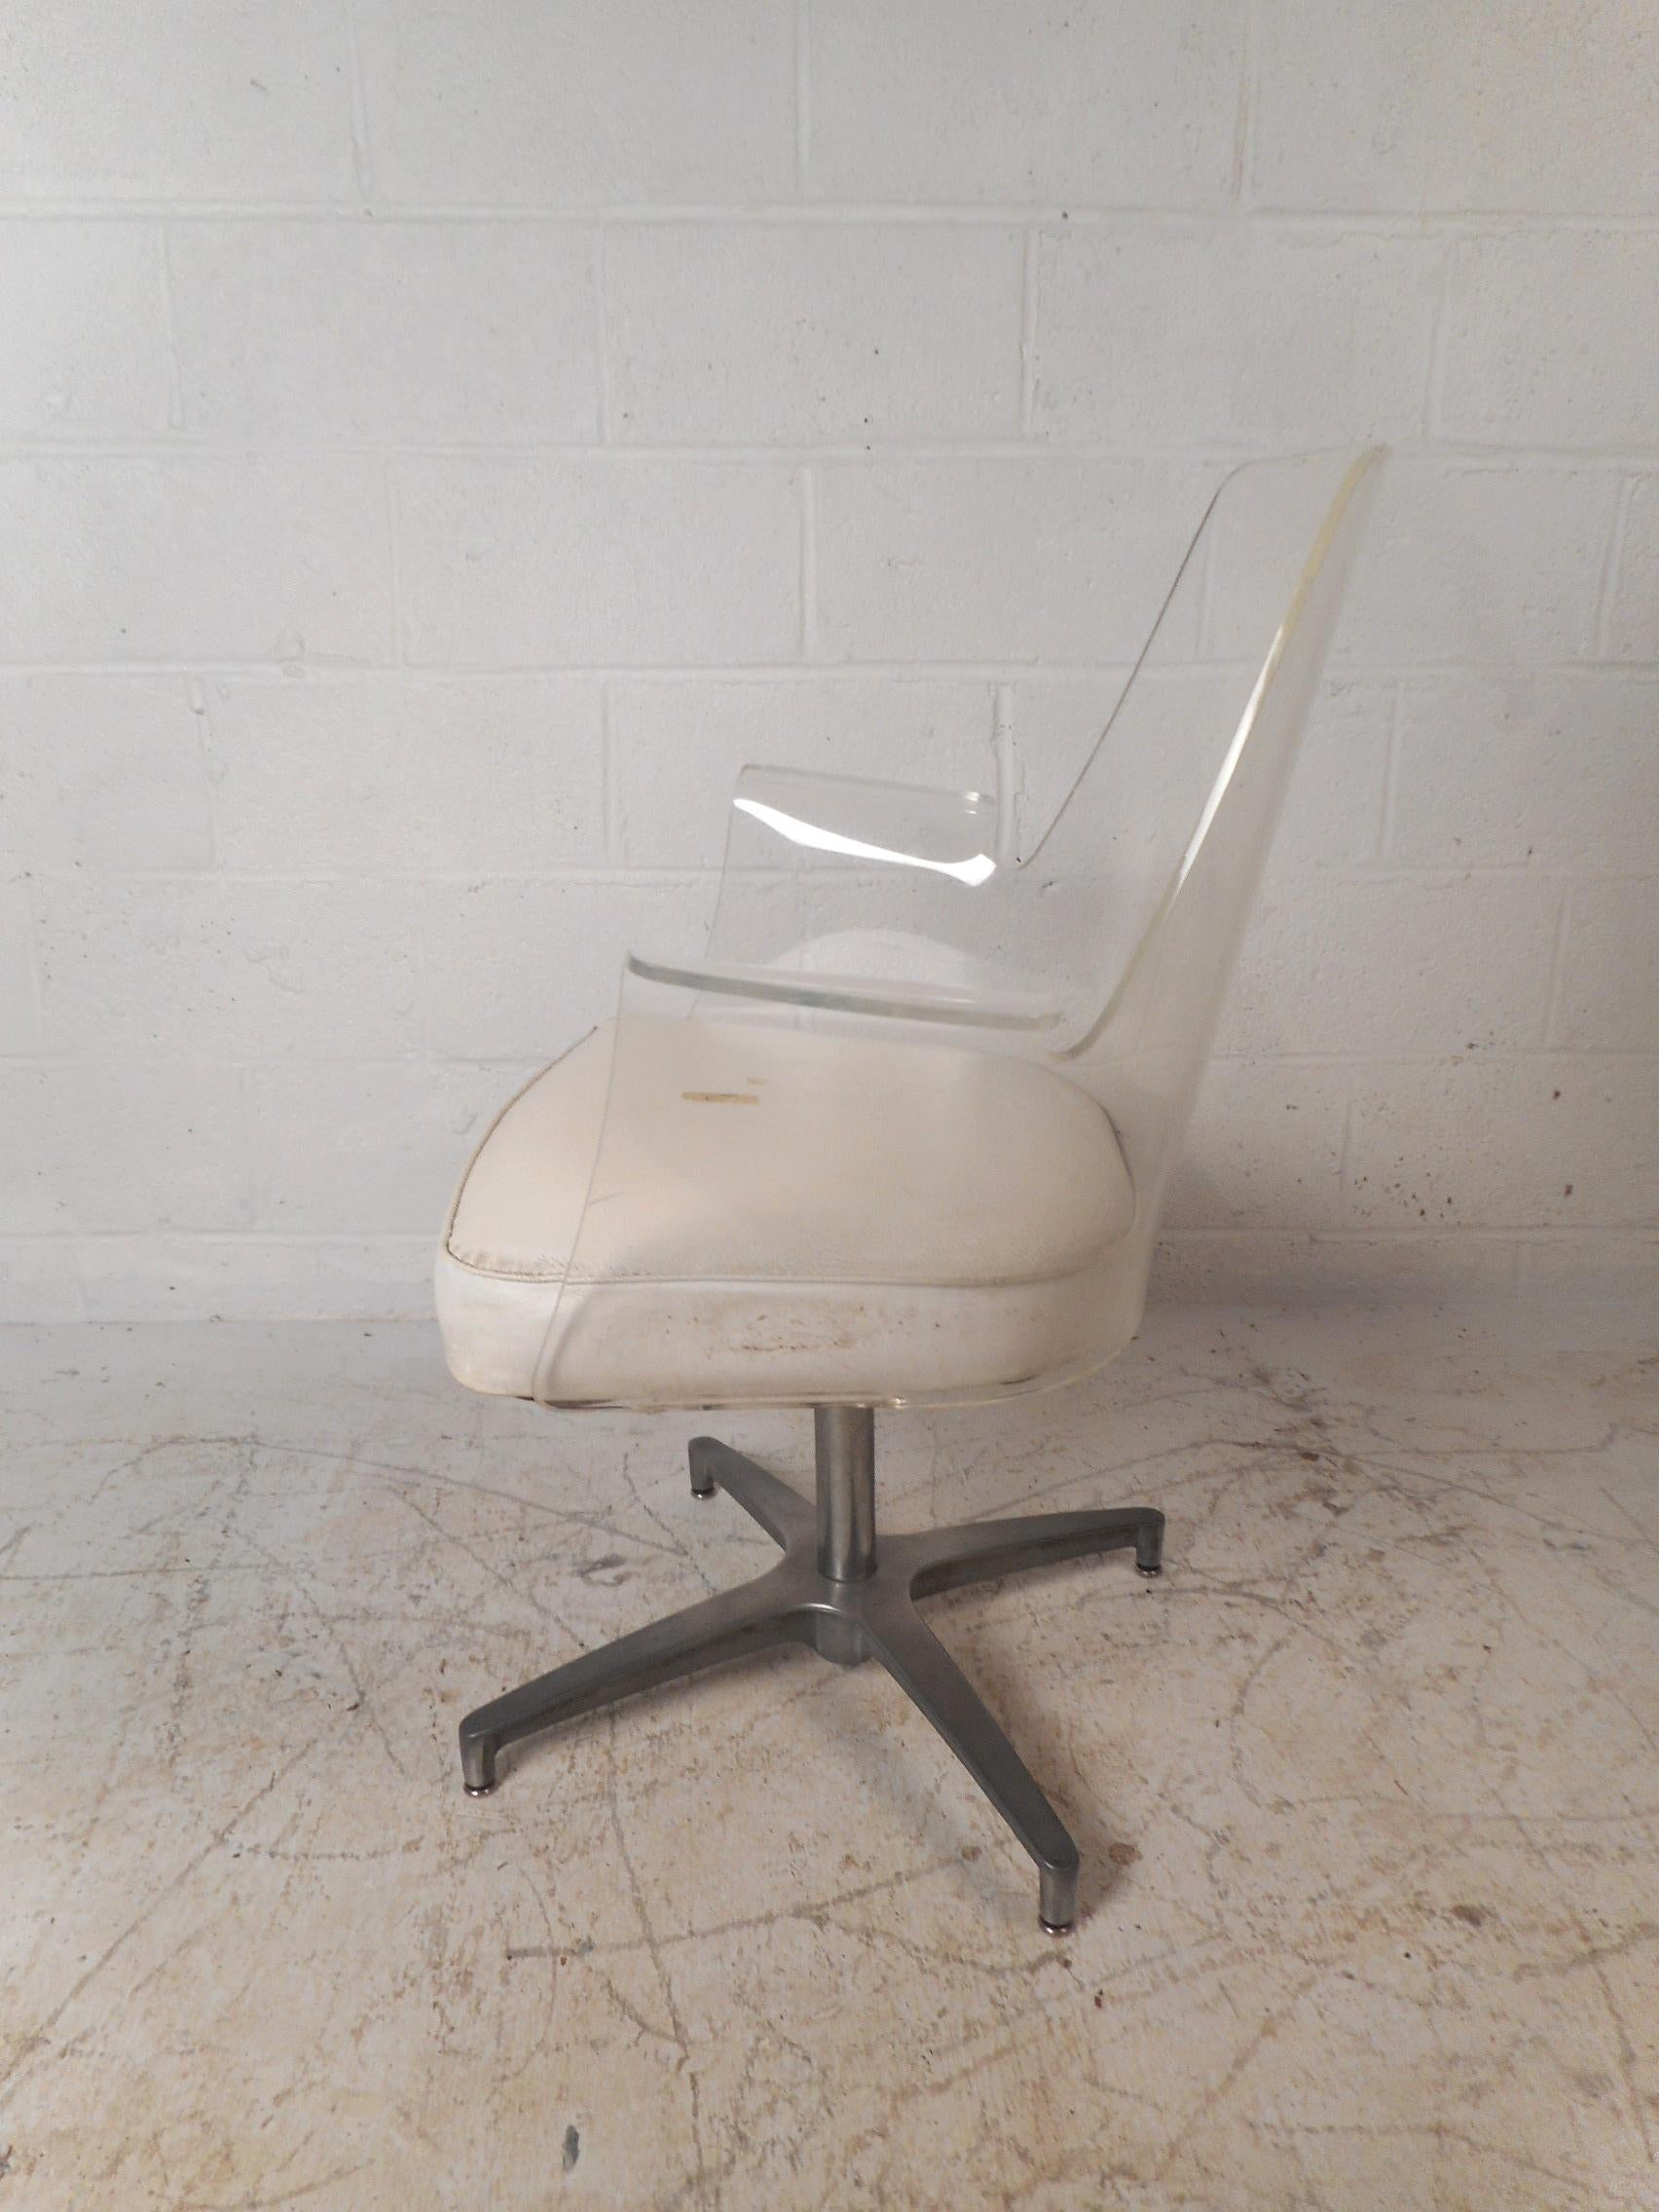 A beautiful vintage modern Lucite desk chair with turned armrests and a swivel base. The thick padded seating covered in white vinyl and sculpted design add to the midcentury appeal. This unique Herman Miller style chair offers maximum comfort